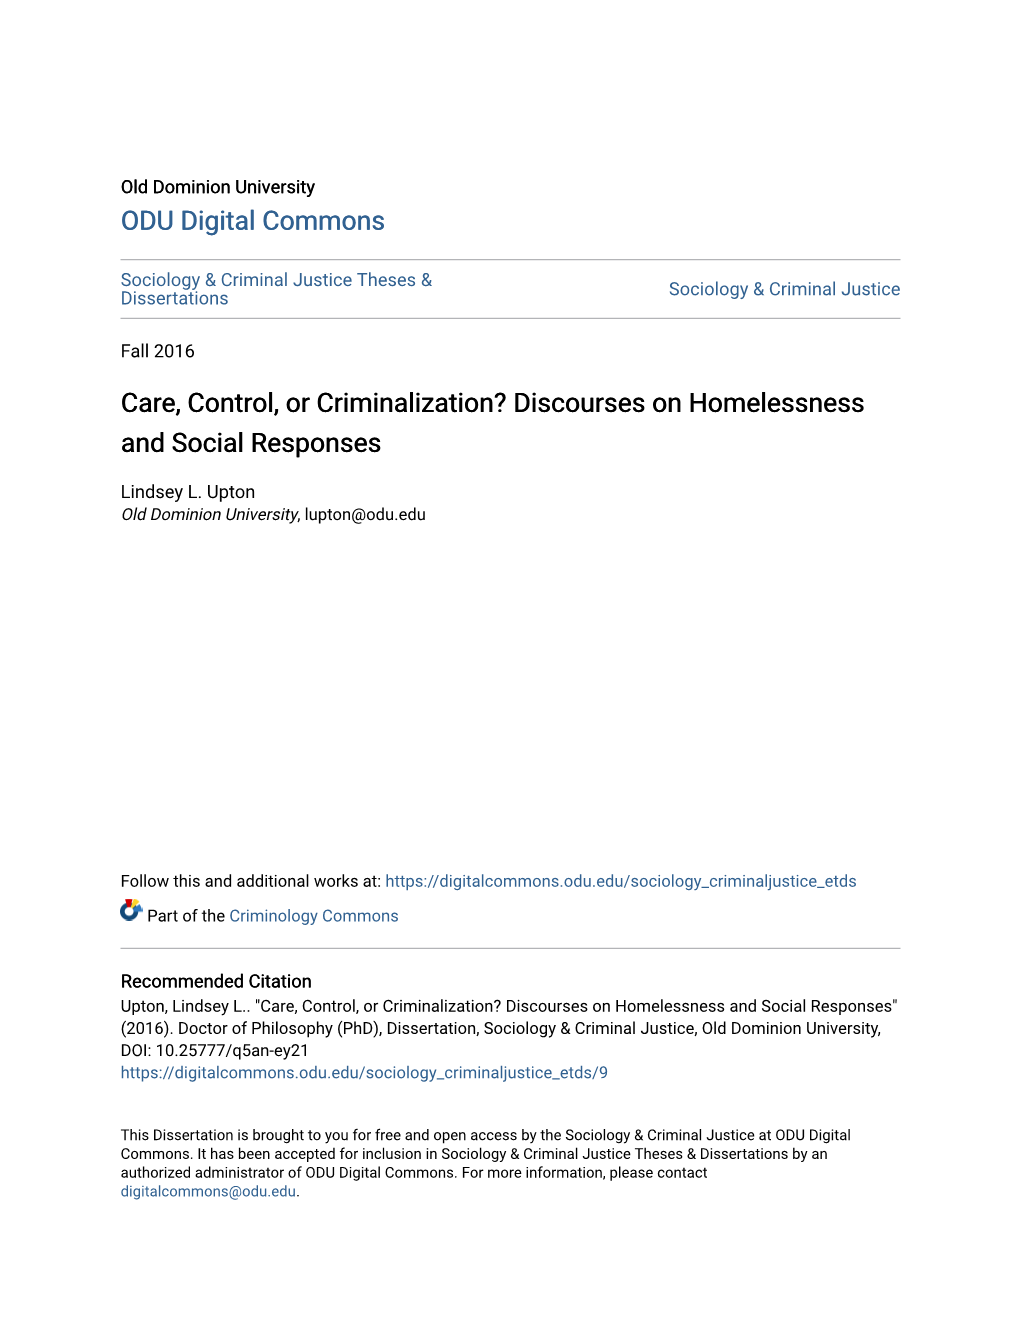 Care, Control, Or Criminalization? Discourses on Homelessness and Social Responses